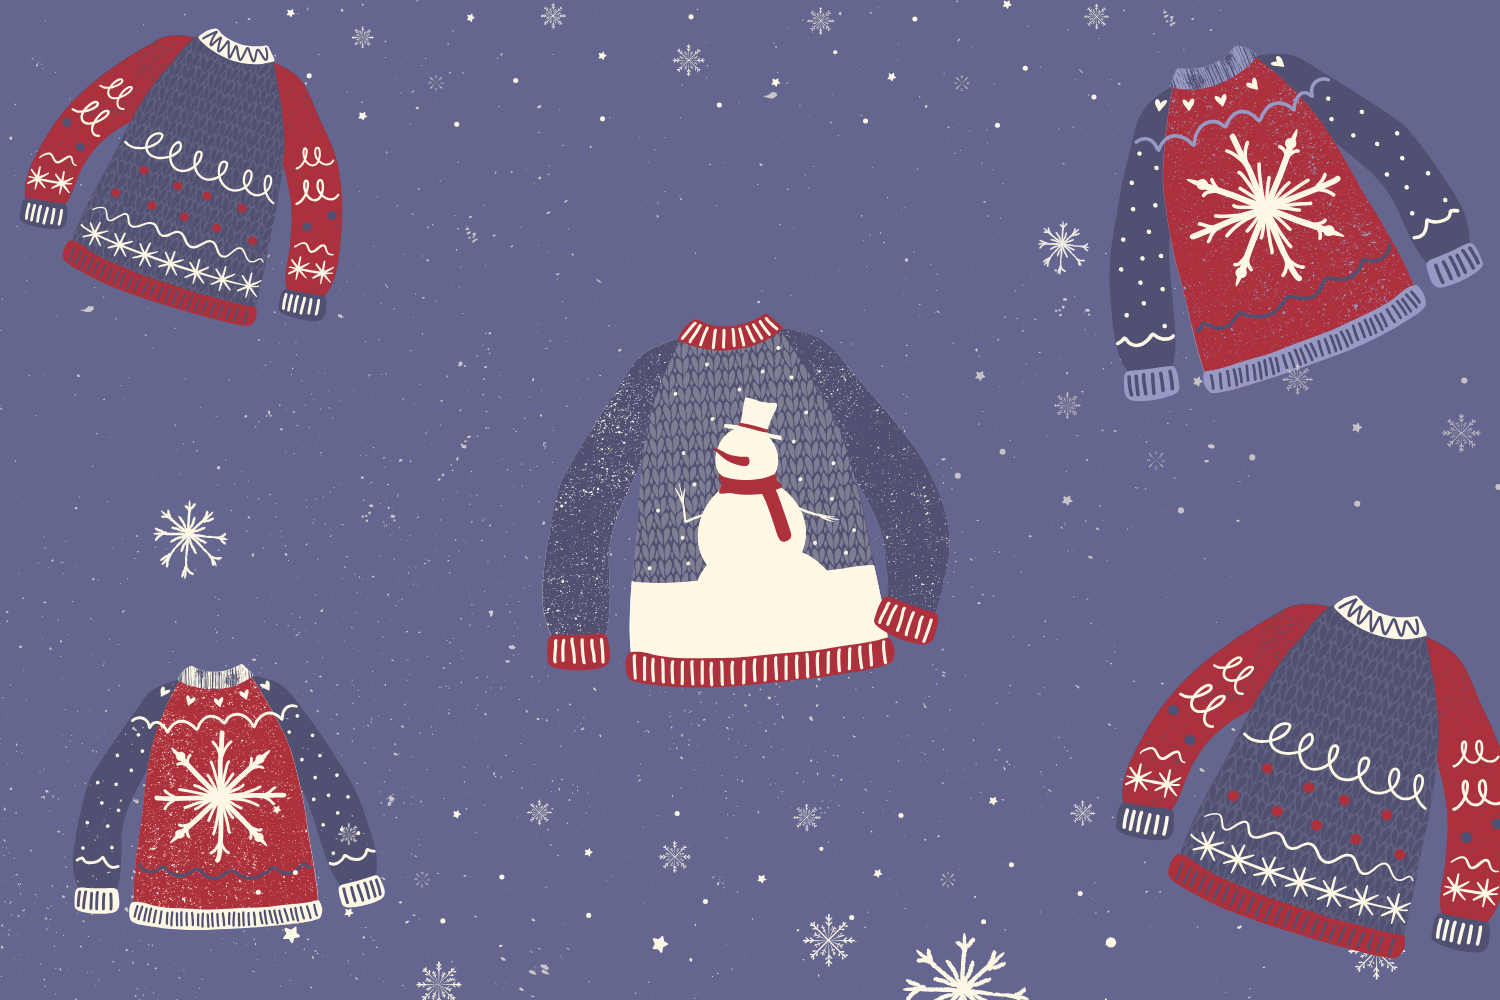 Image of Christmas Sweaters on a snowy background